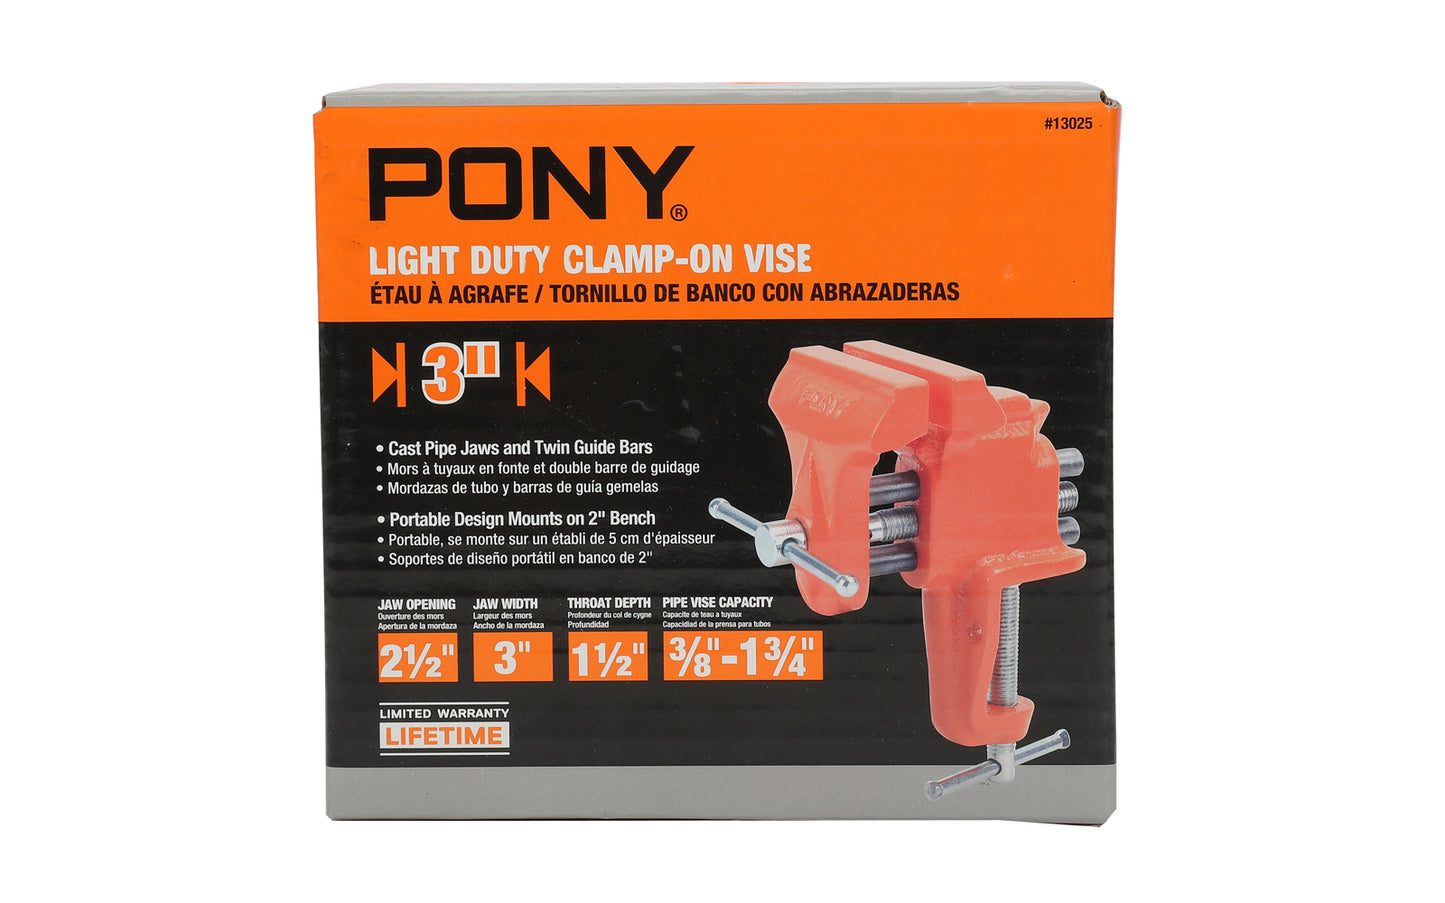 Pony 3" Light-Duty Clamp On Vise ~ 2-1/2" Jaw Opening - Pony / Jorgensen Model No. 13025 - Cast pipe jaws & twin guide bars - Pipe capacity 3/8" to 1-3/4"